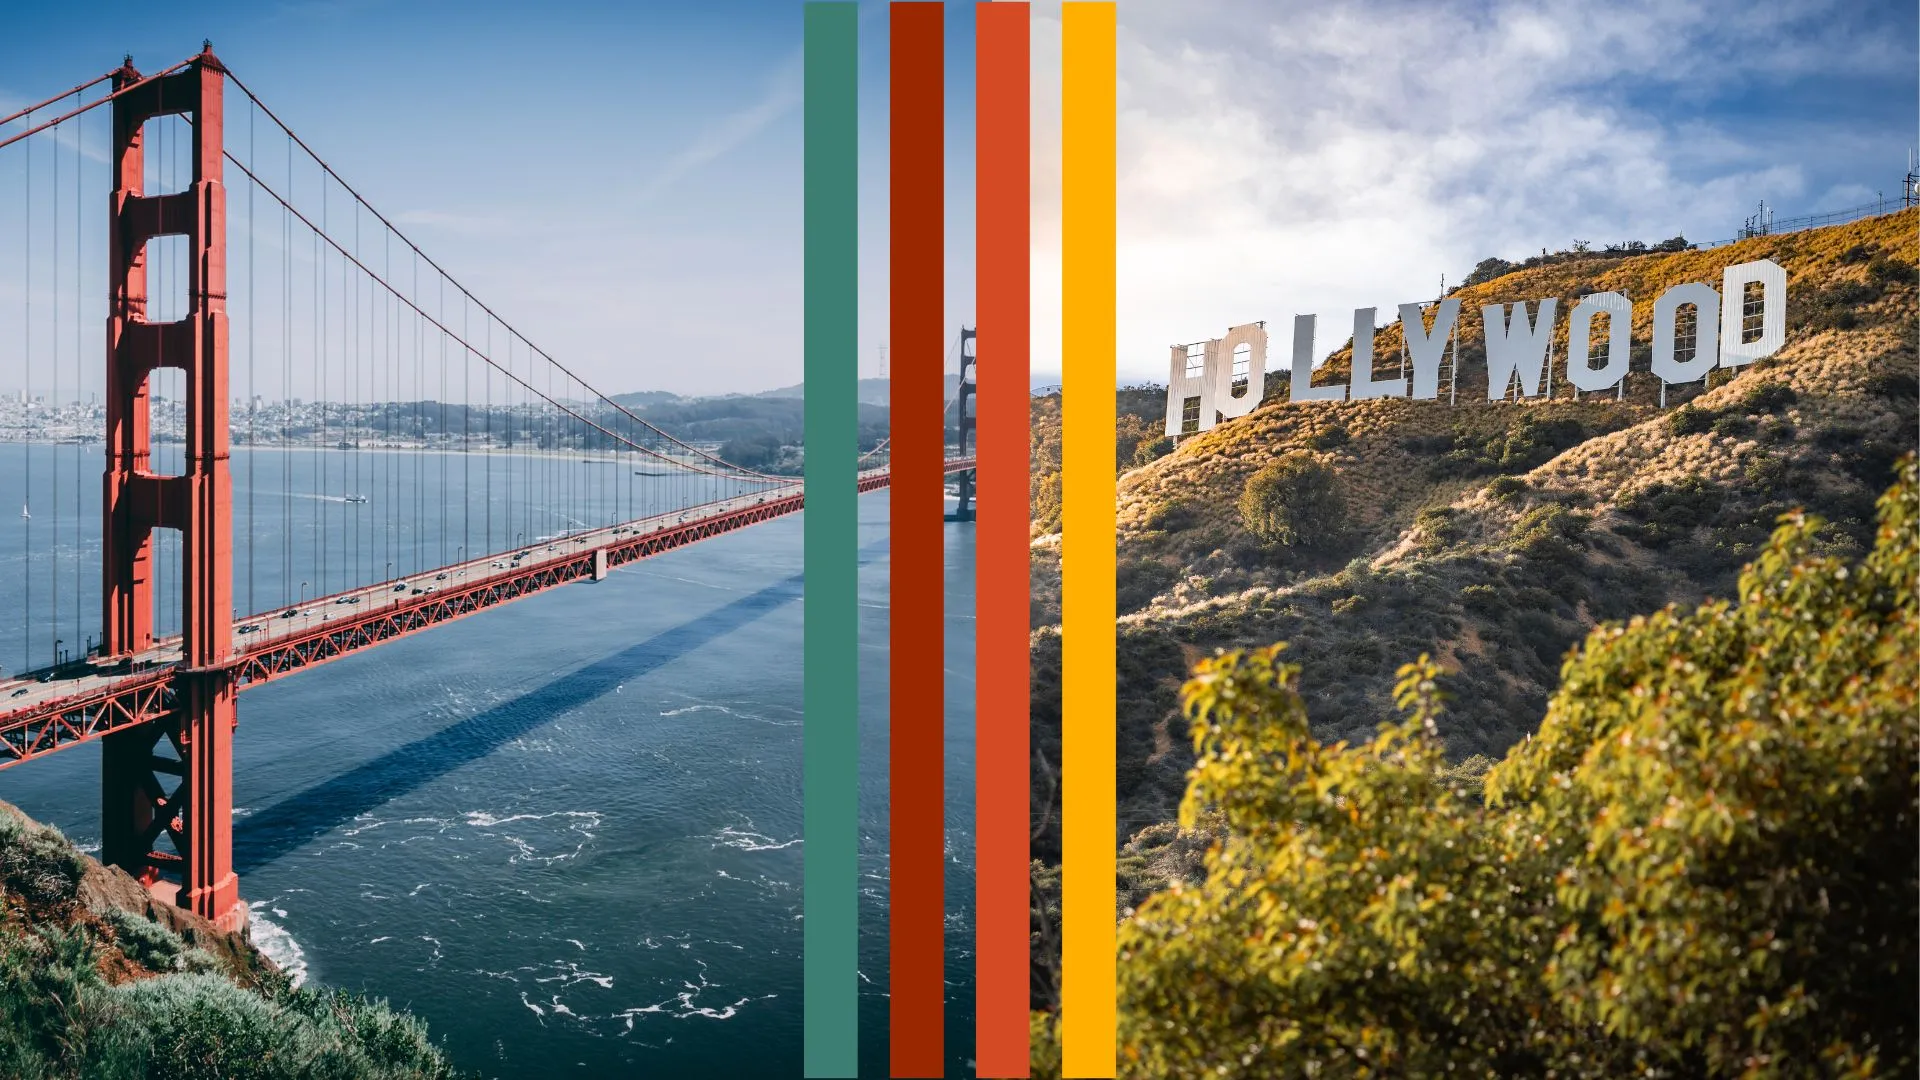 How would you compare san francisco vs los angeles?